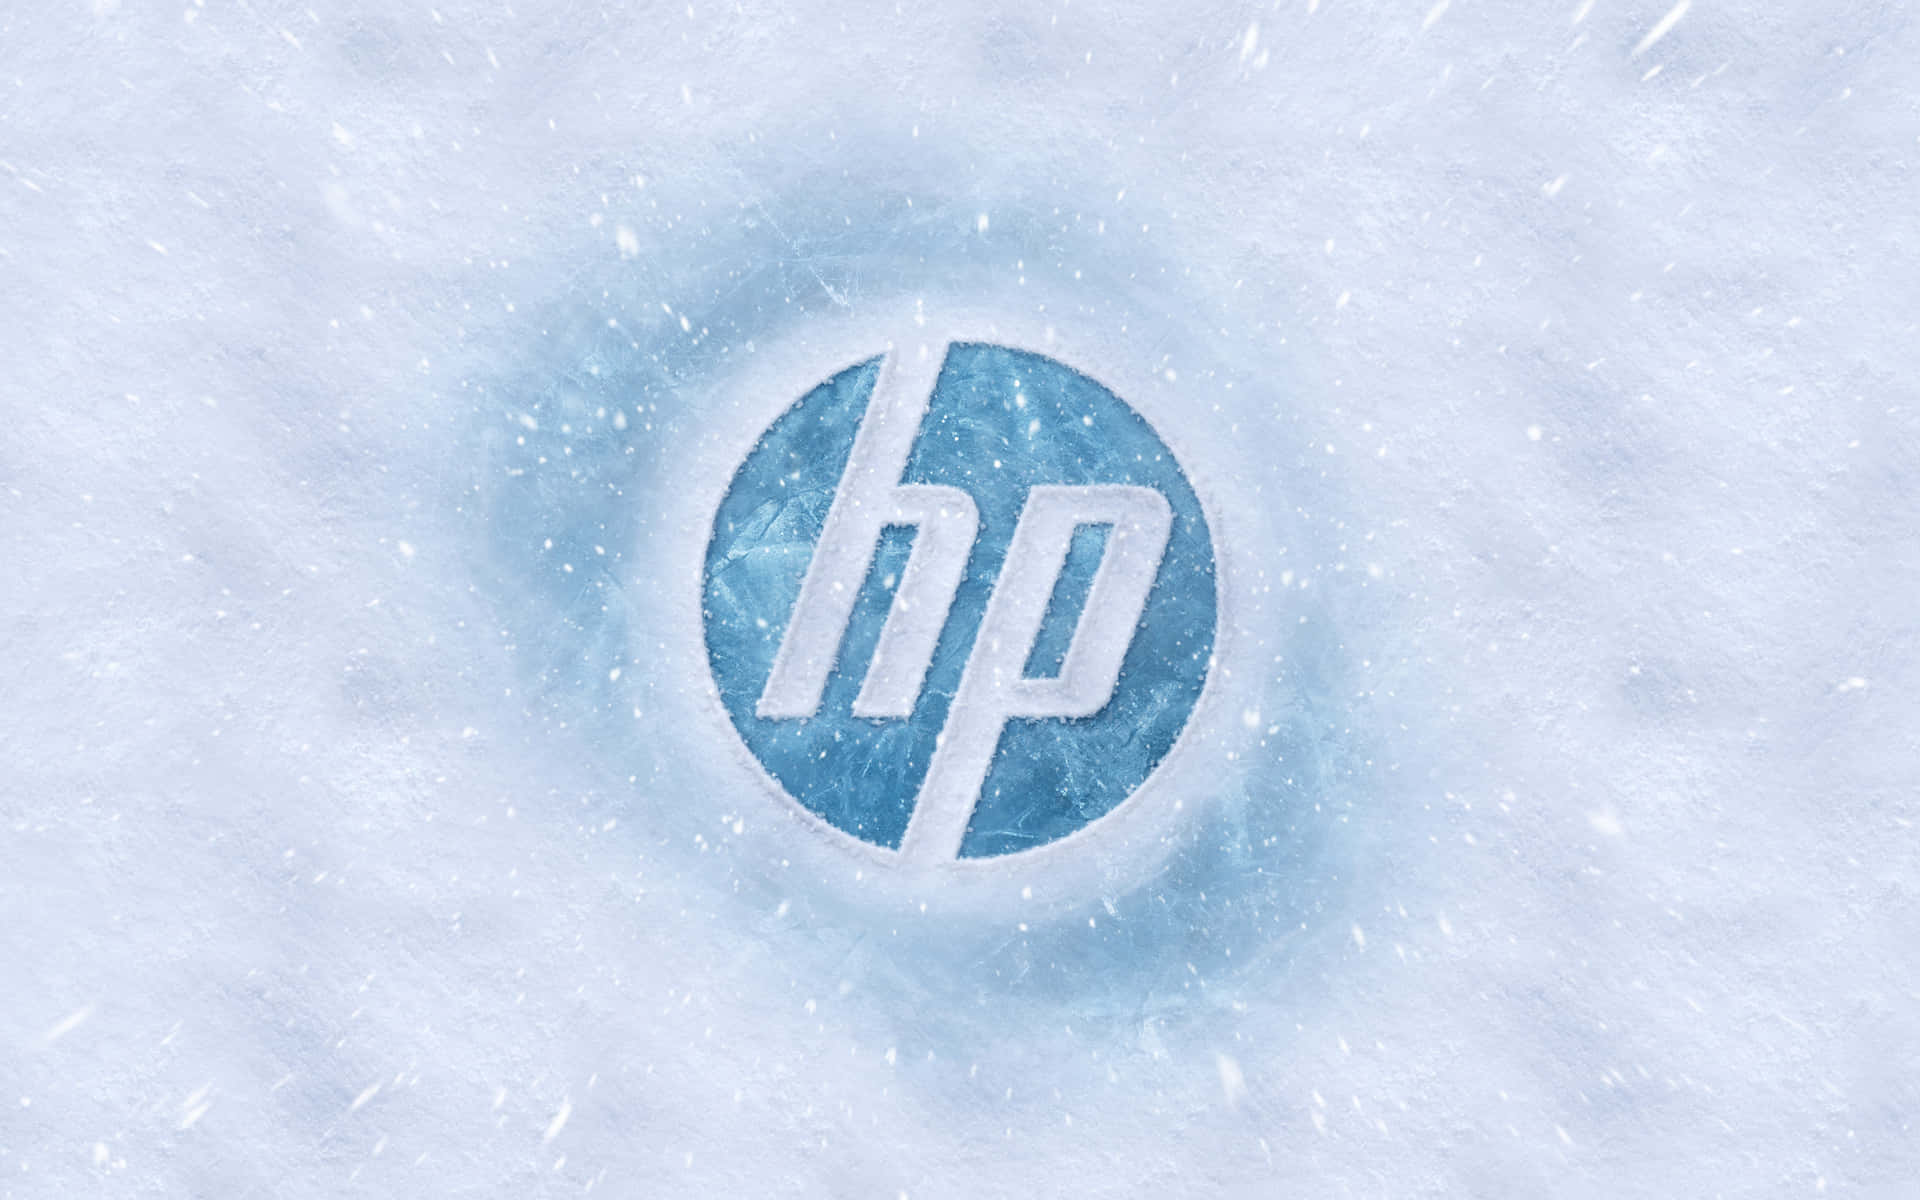 It's time to upgrade to HP's powerful computing technology